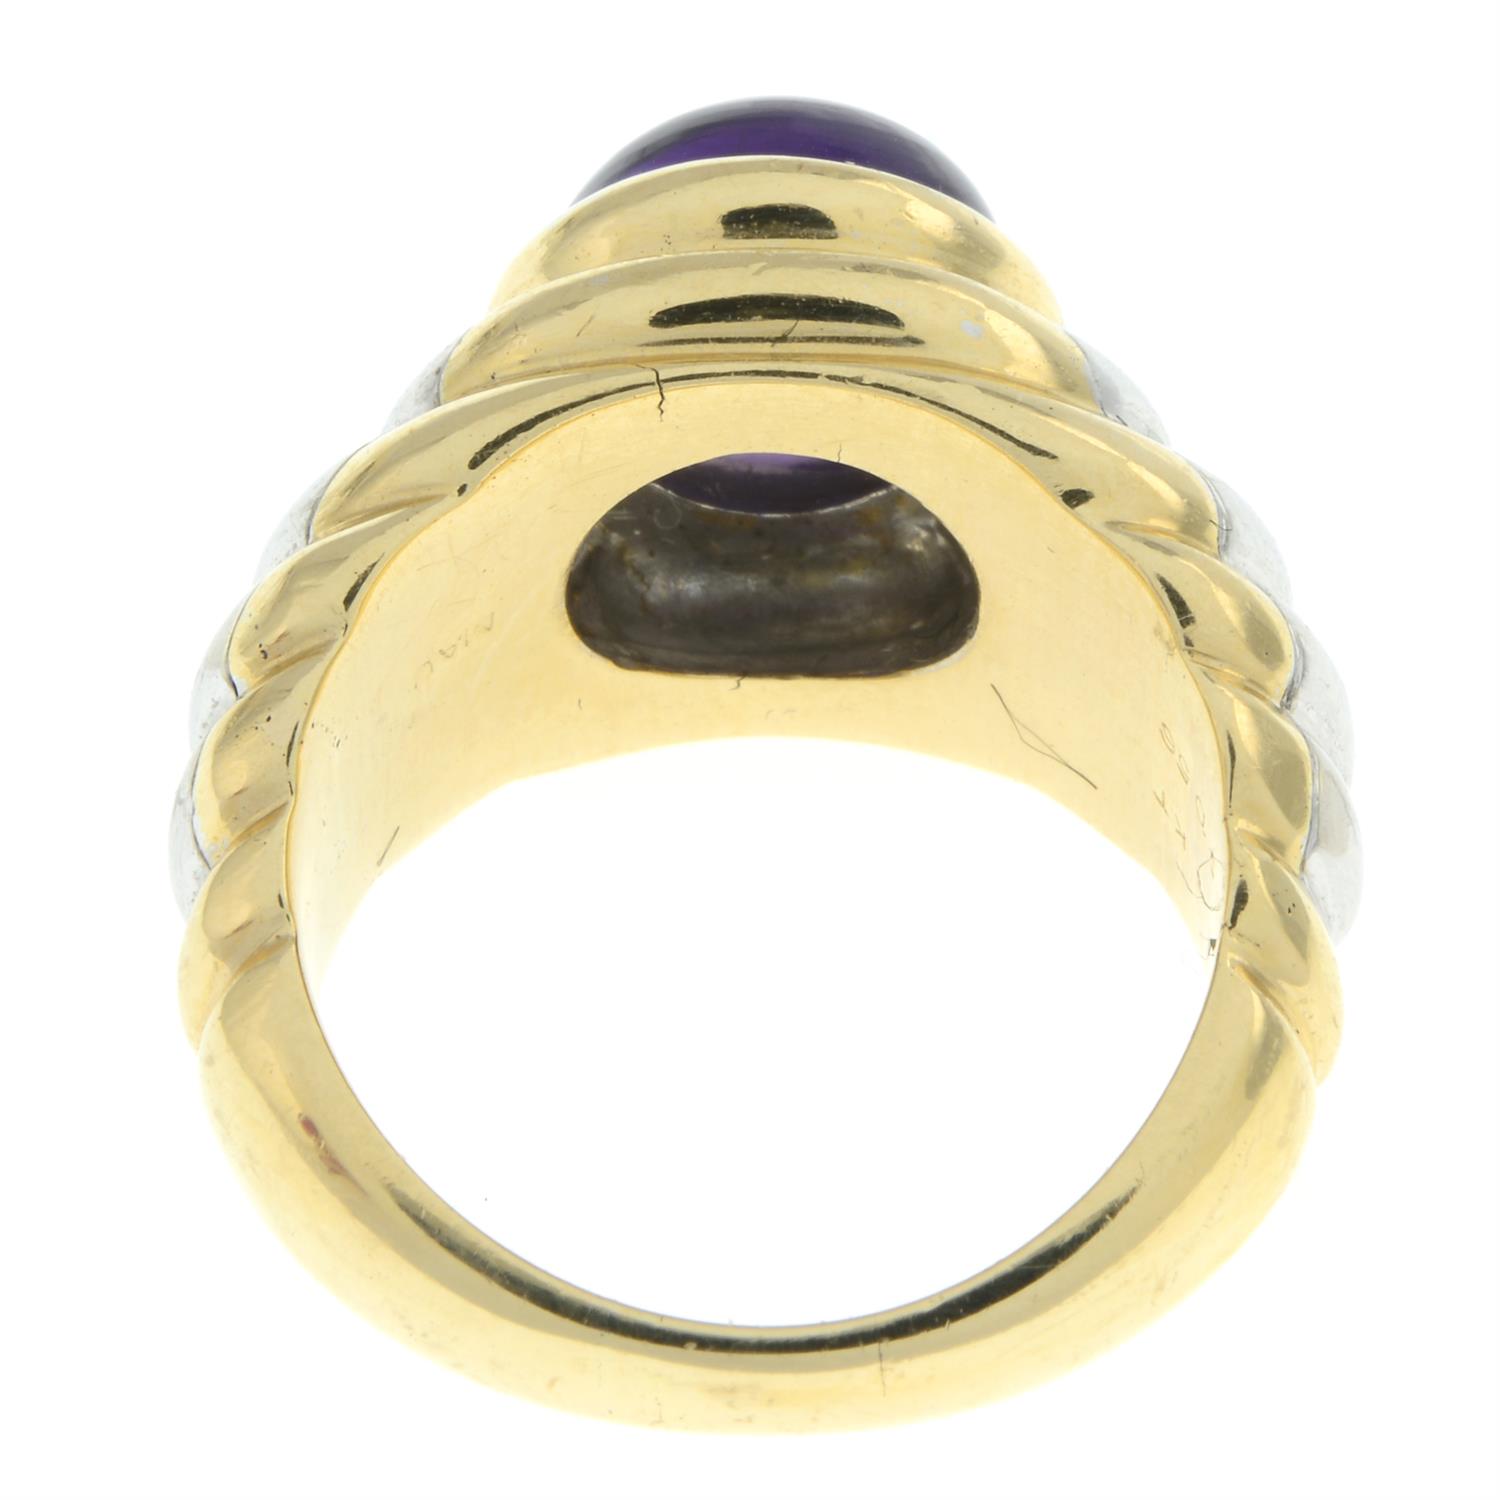 Amethyst ring, by Mauboussin - Image 3 of 5